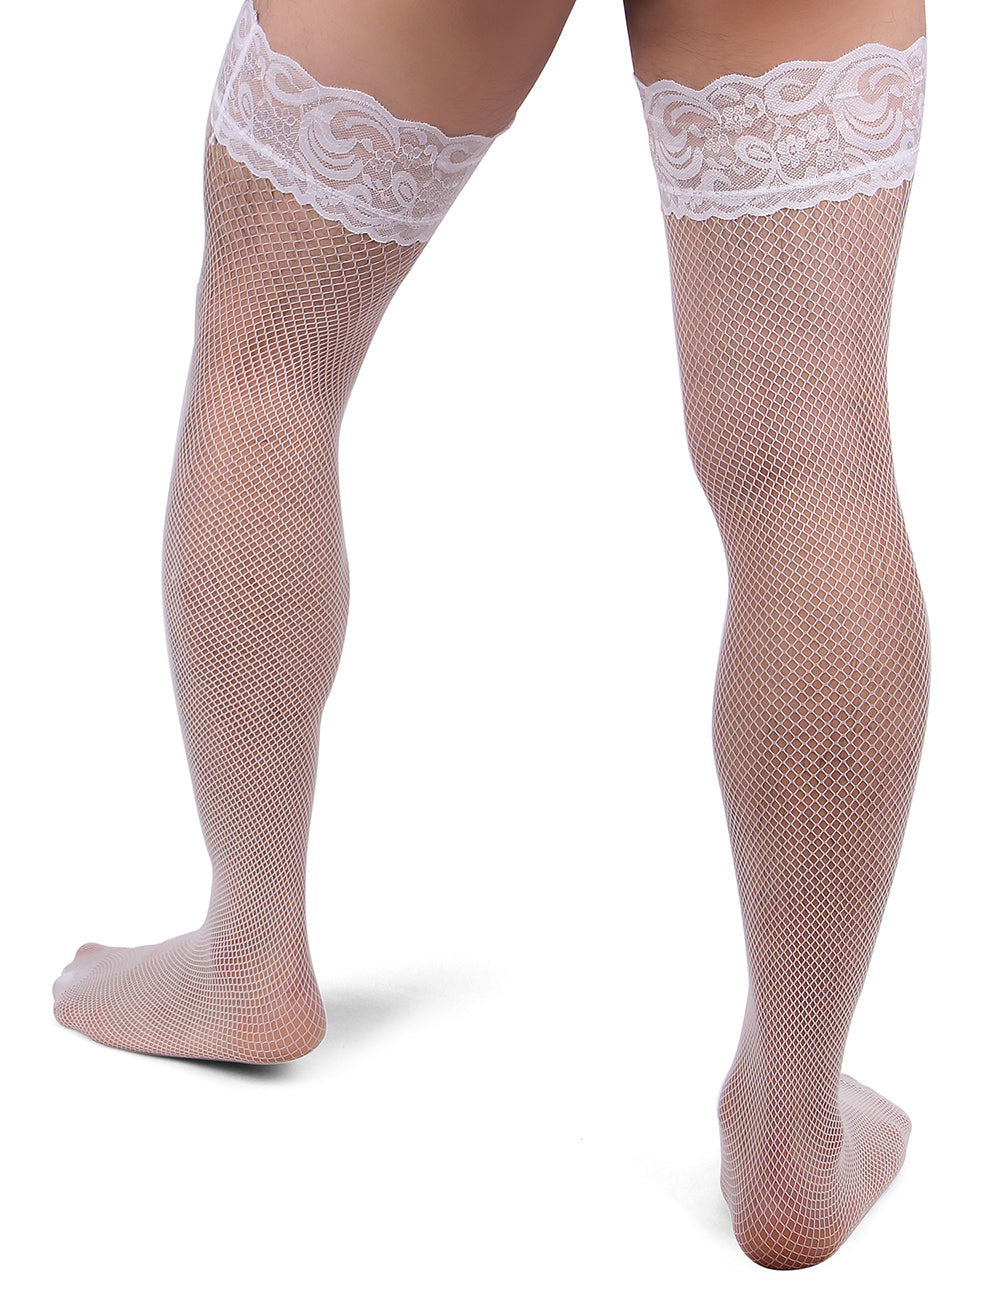 JCSTK - Unisex Fishnet Lace Top Stockings, Strong for Our Males to Wear! White